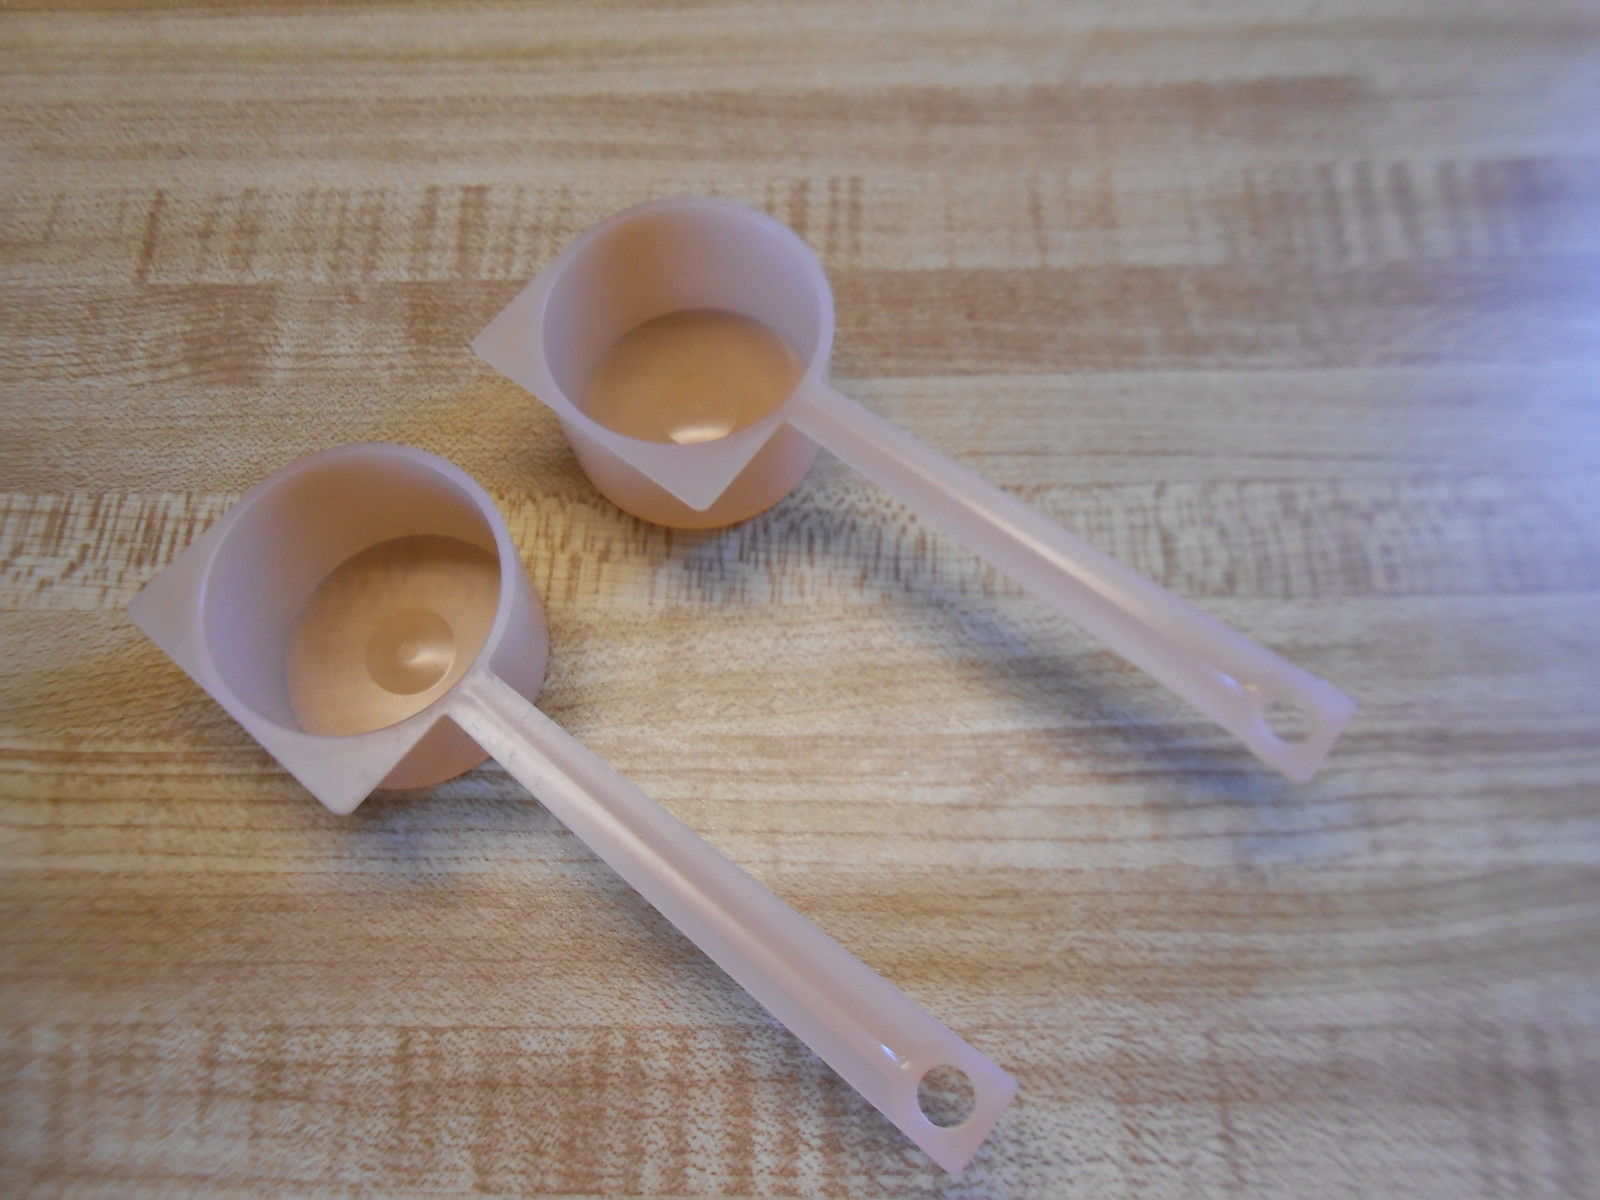 Linwnil Cookie Scoop Set - Small/1 Tablespoon, Medium/2 Tablespoon, Large/3 Tablespoon - Ice Cream Scoop Set, 18/8 Stainless Steel Dough Scoop